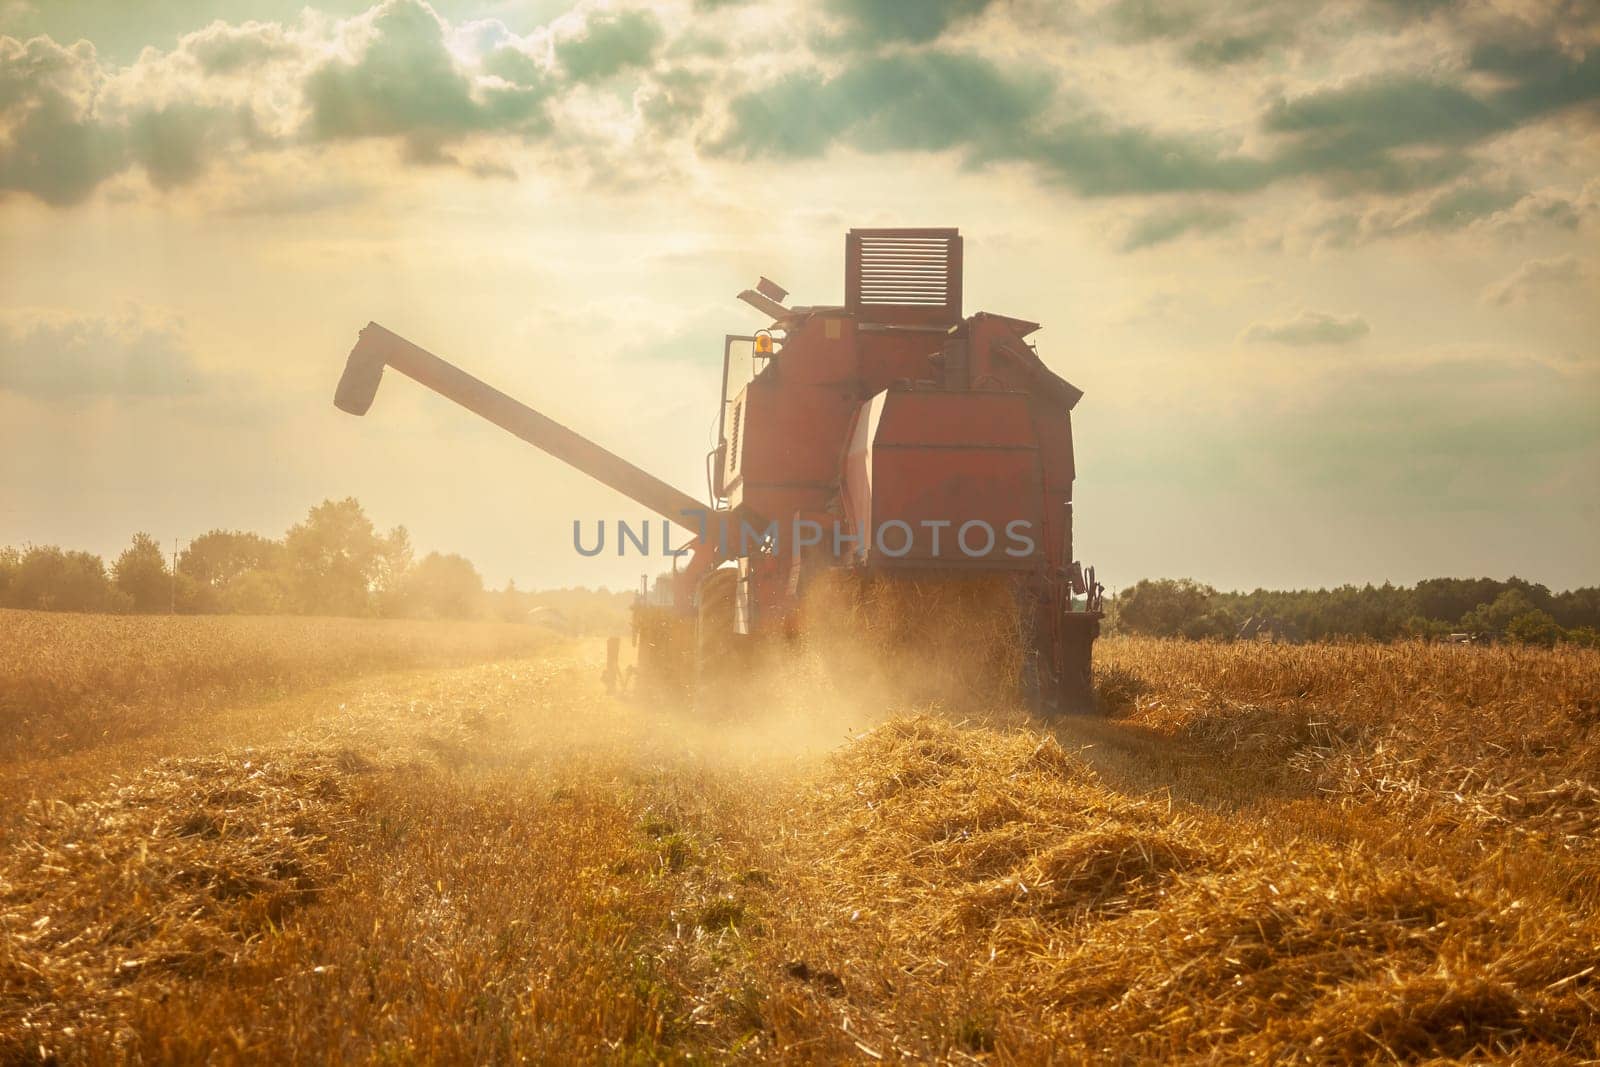 A large agricultural harvester mowing in a field with grain by darekb22